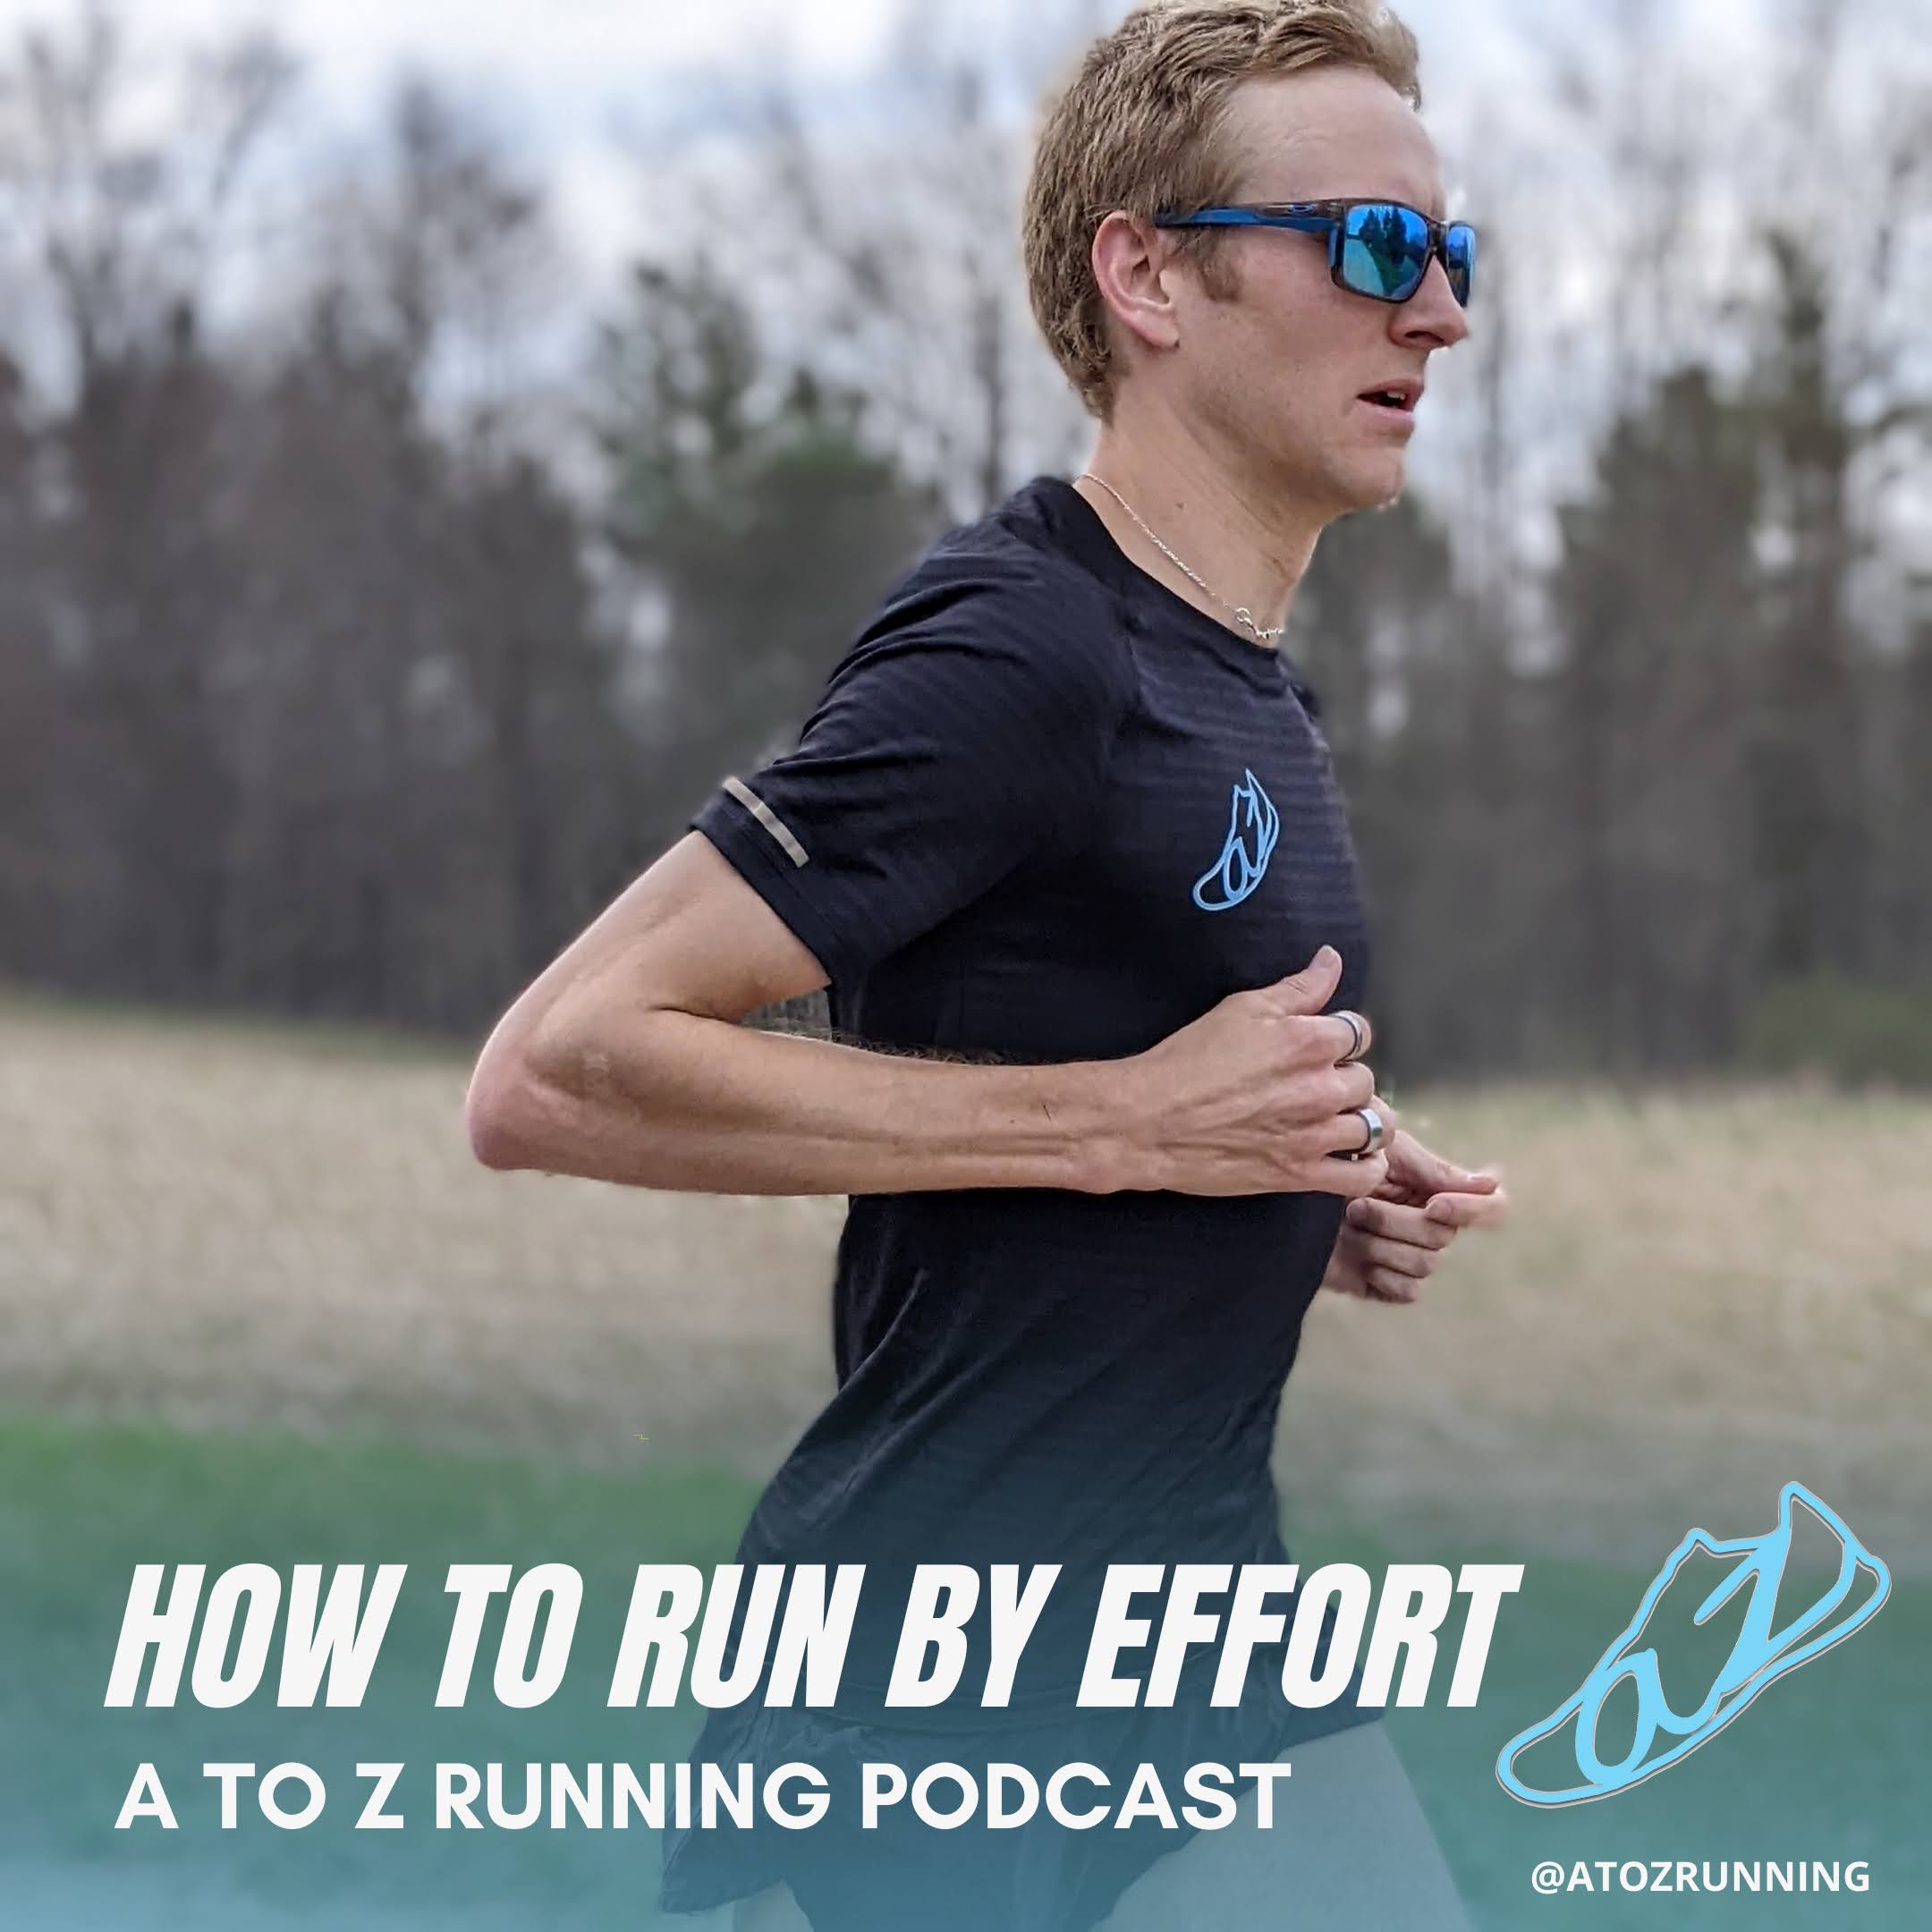 How to run by effort by A to Z Running Podcast